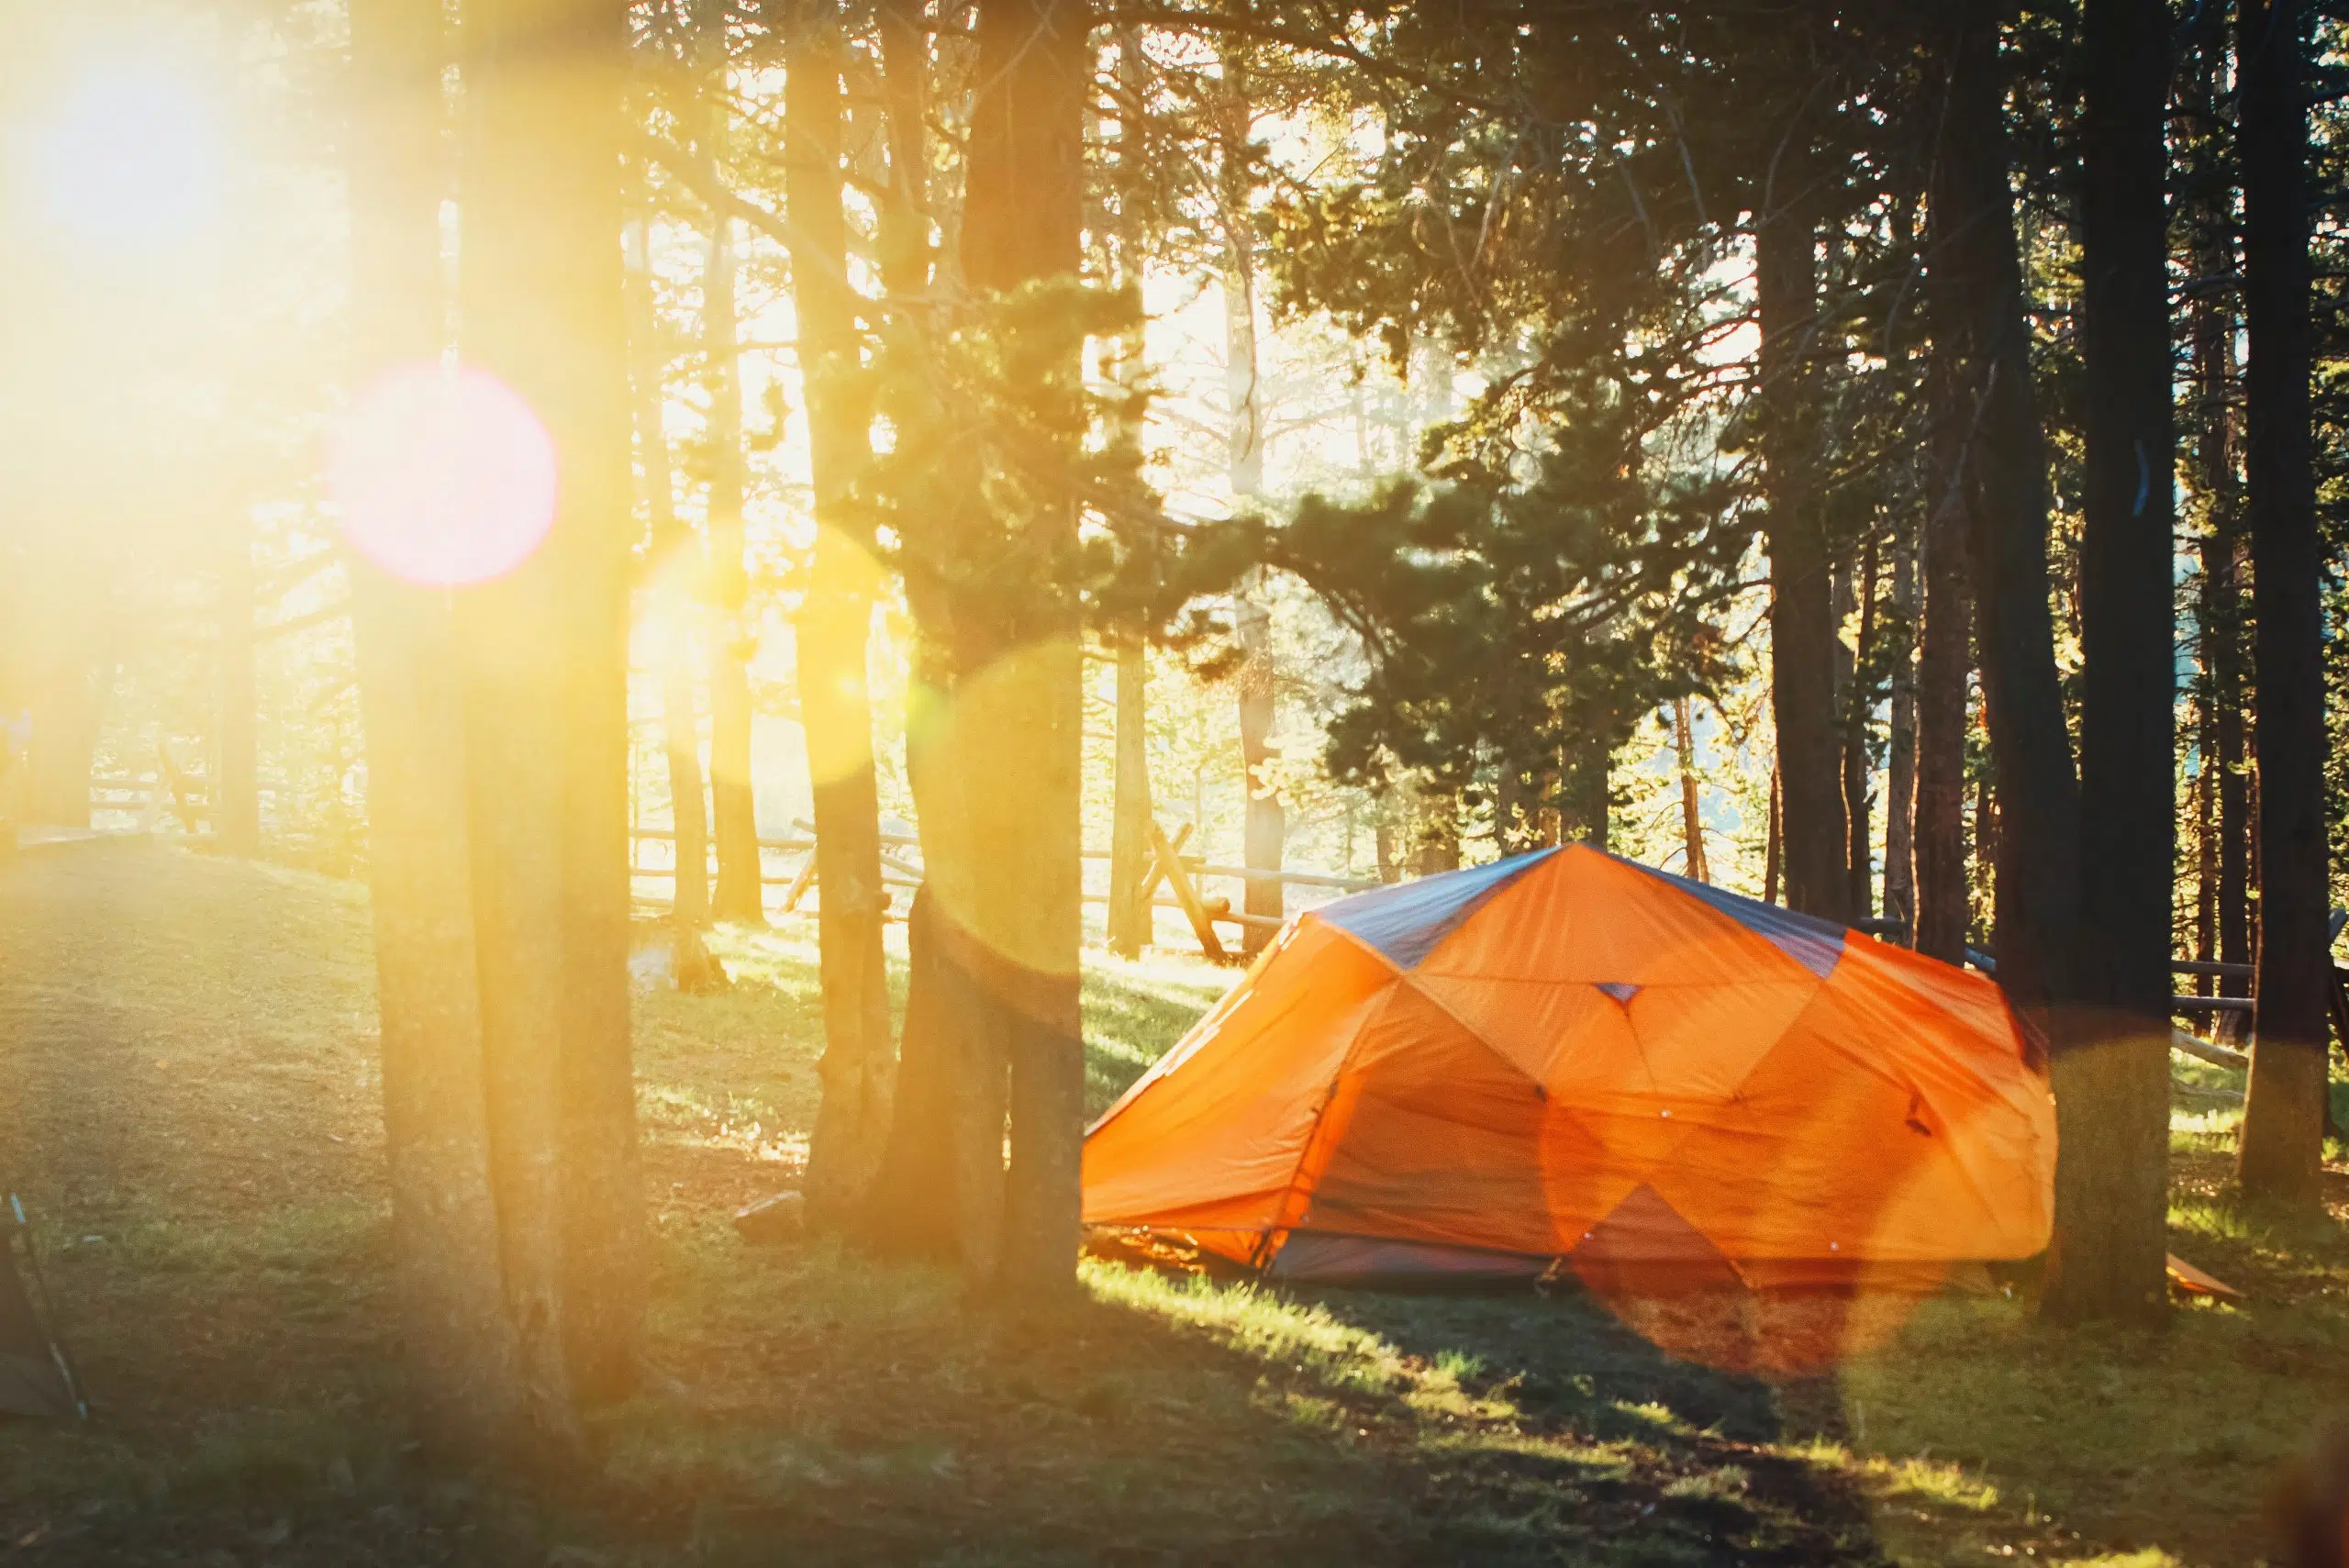 Book a Provincial campsite starting today!